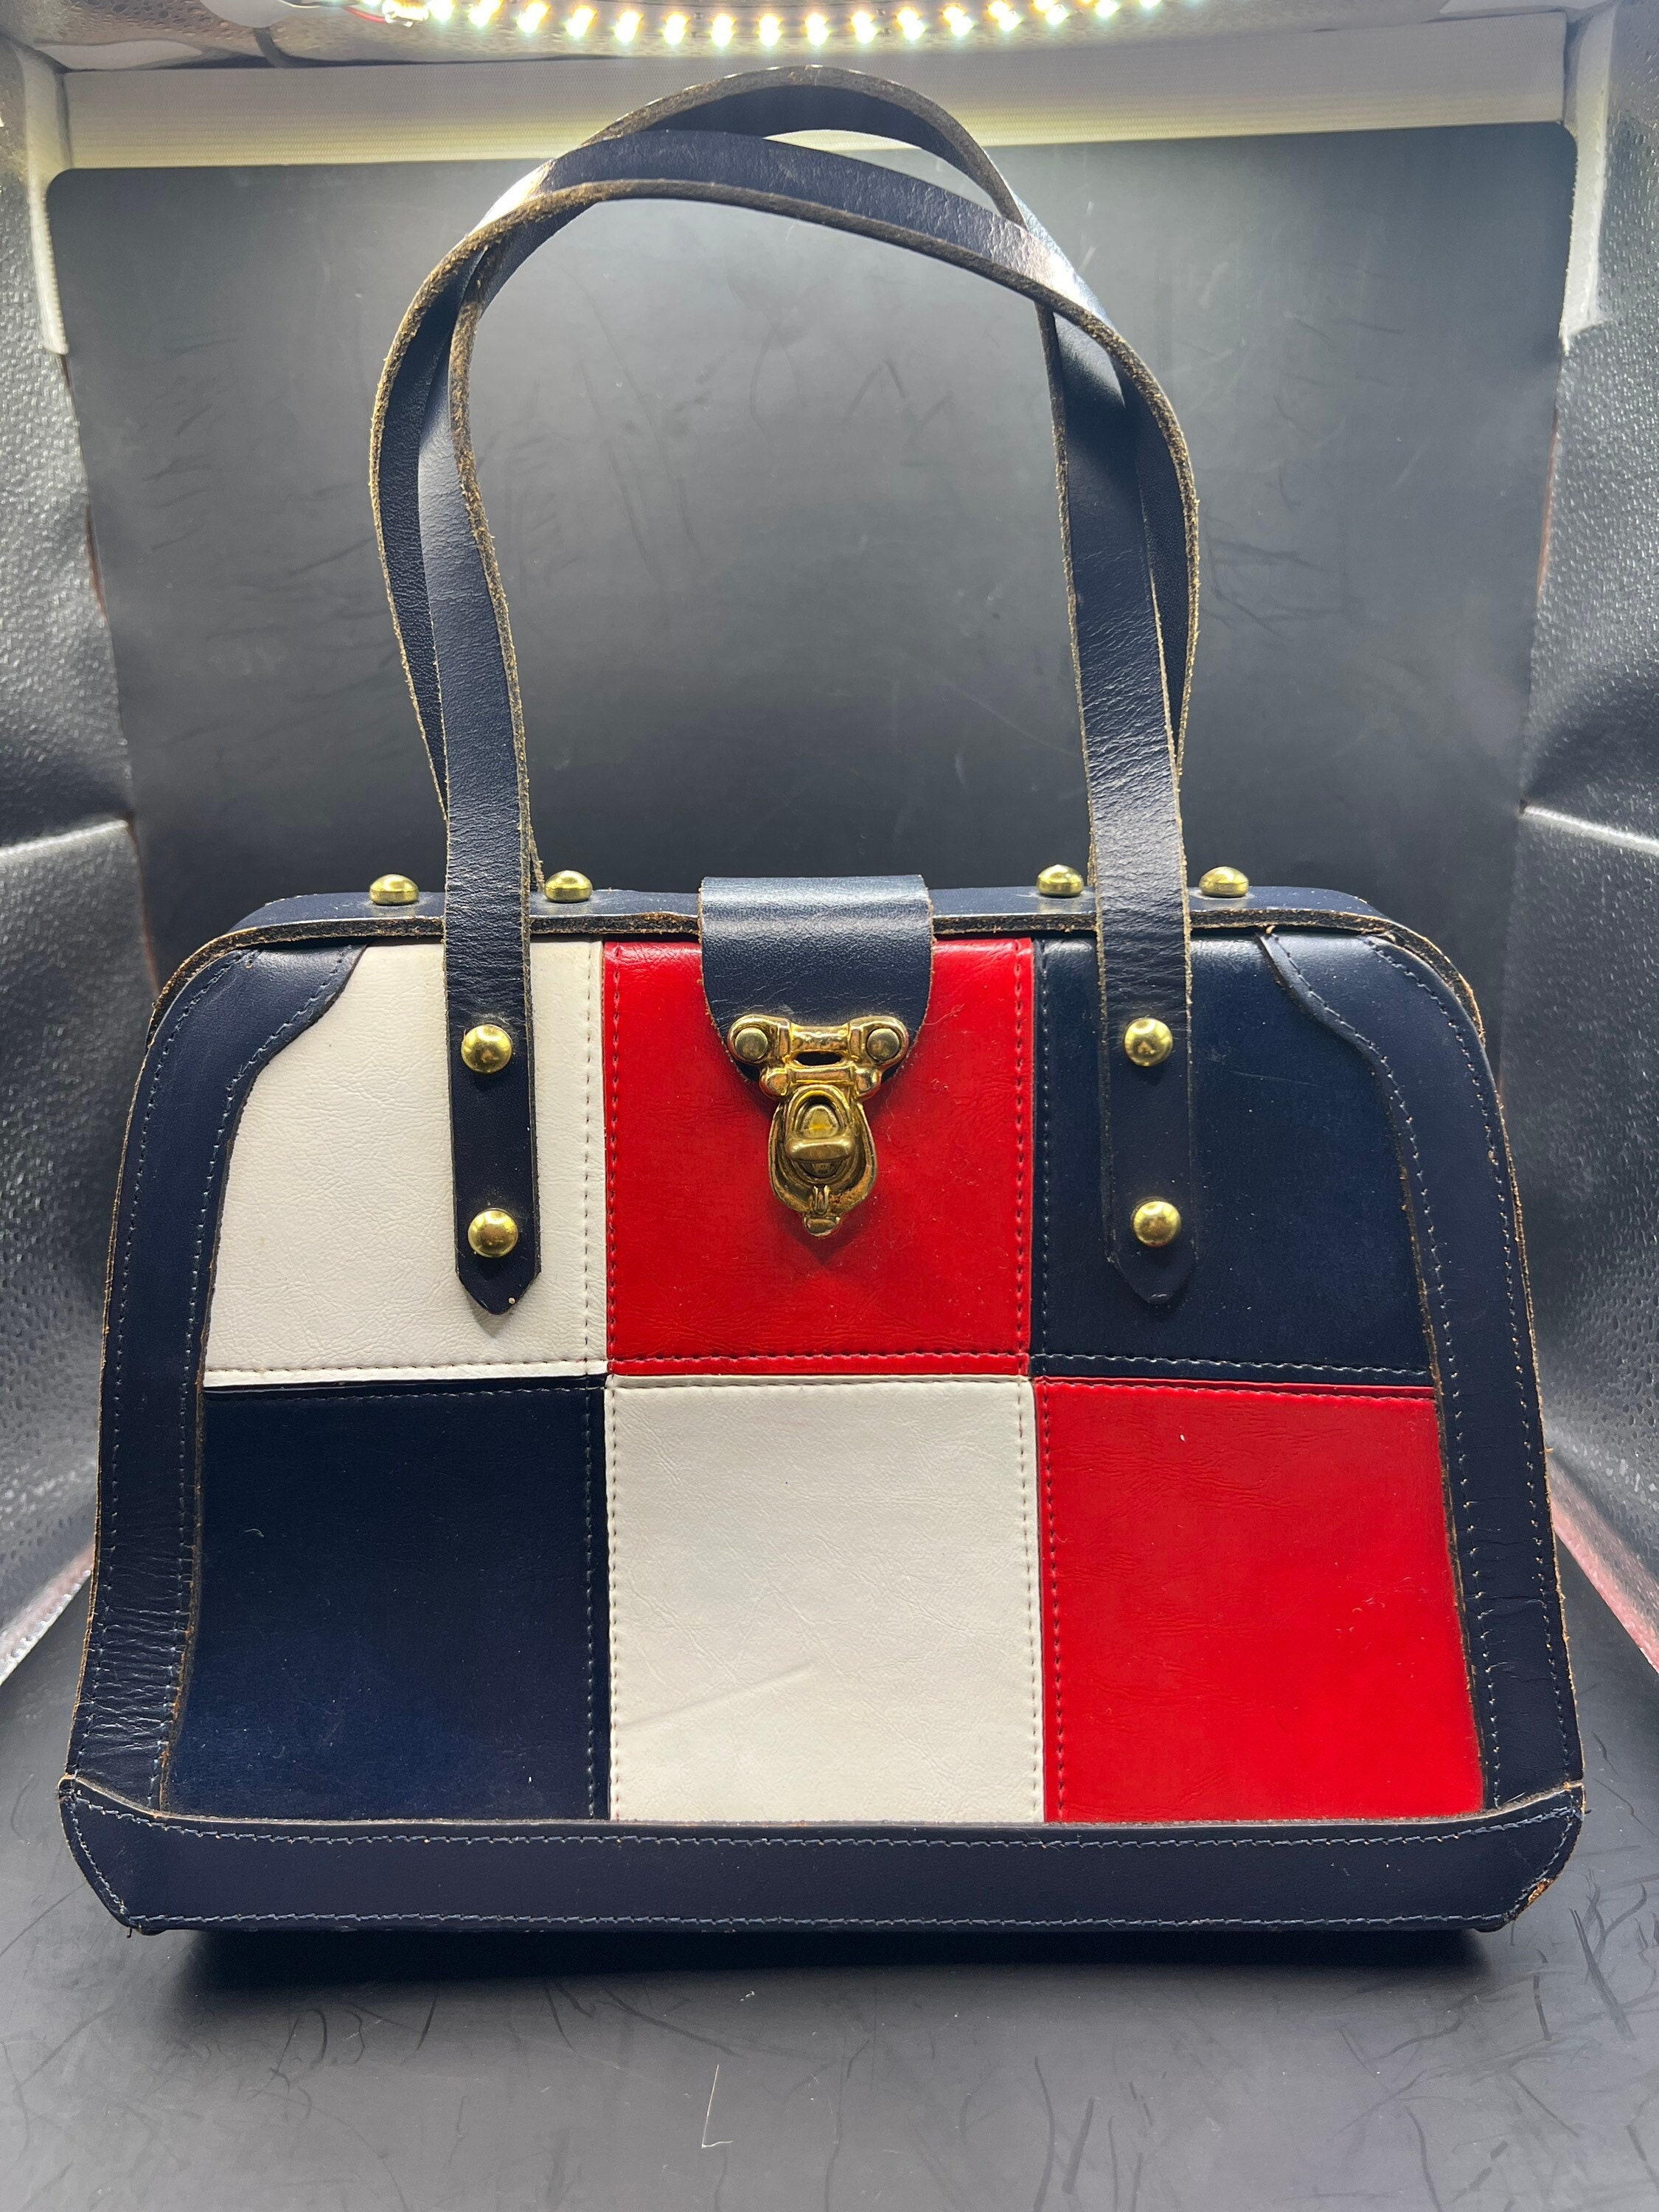 Red. White. and Blue Frame Purse Leather Mondrian Look Made by